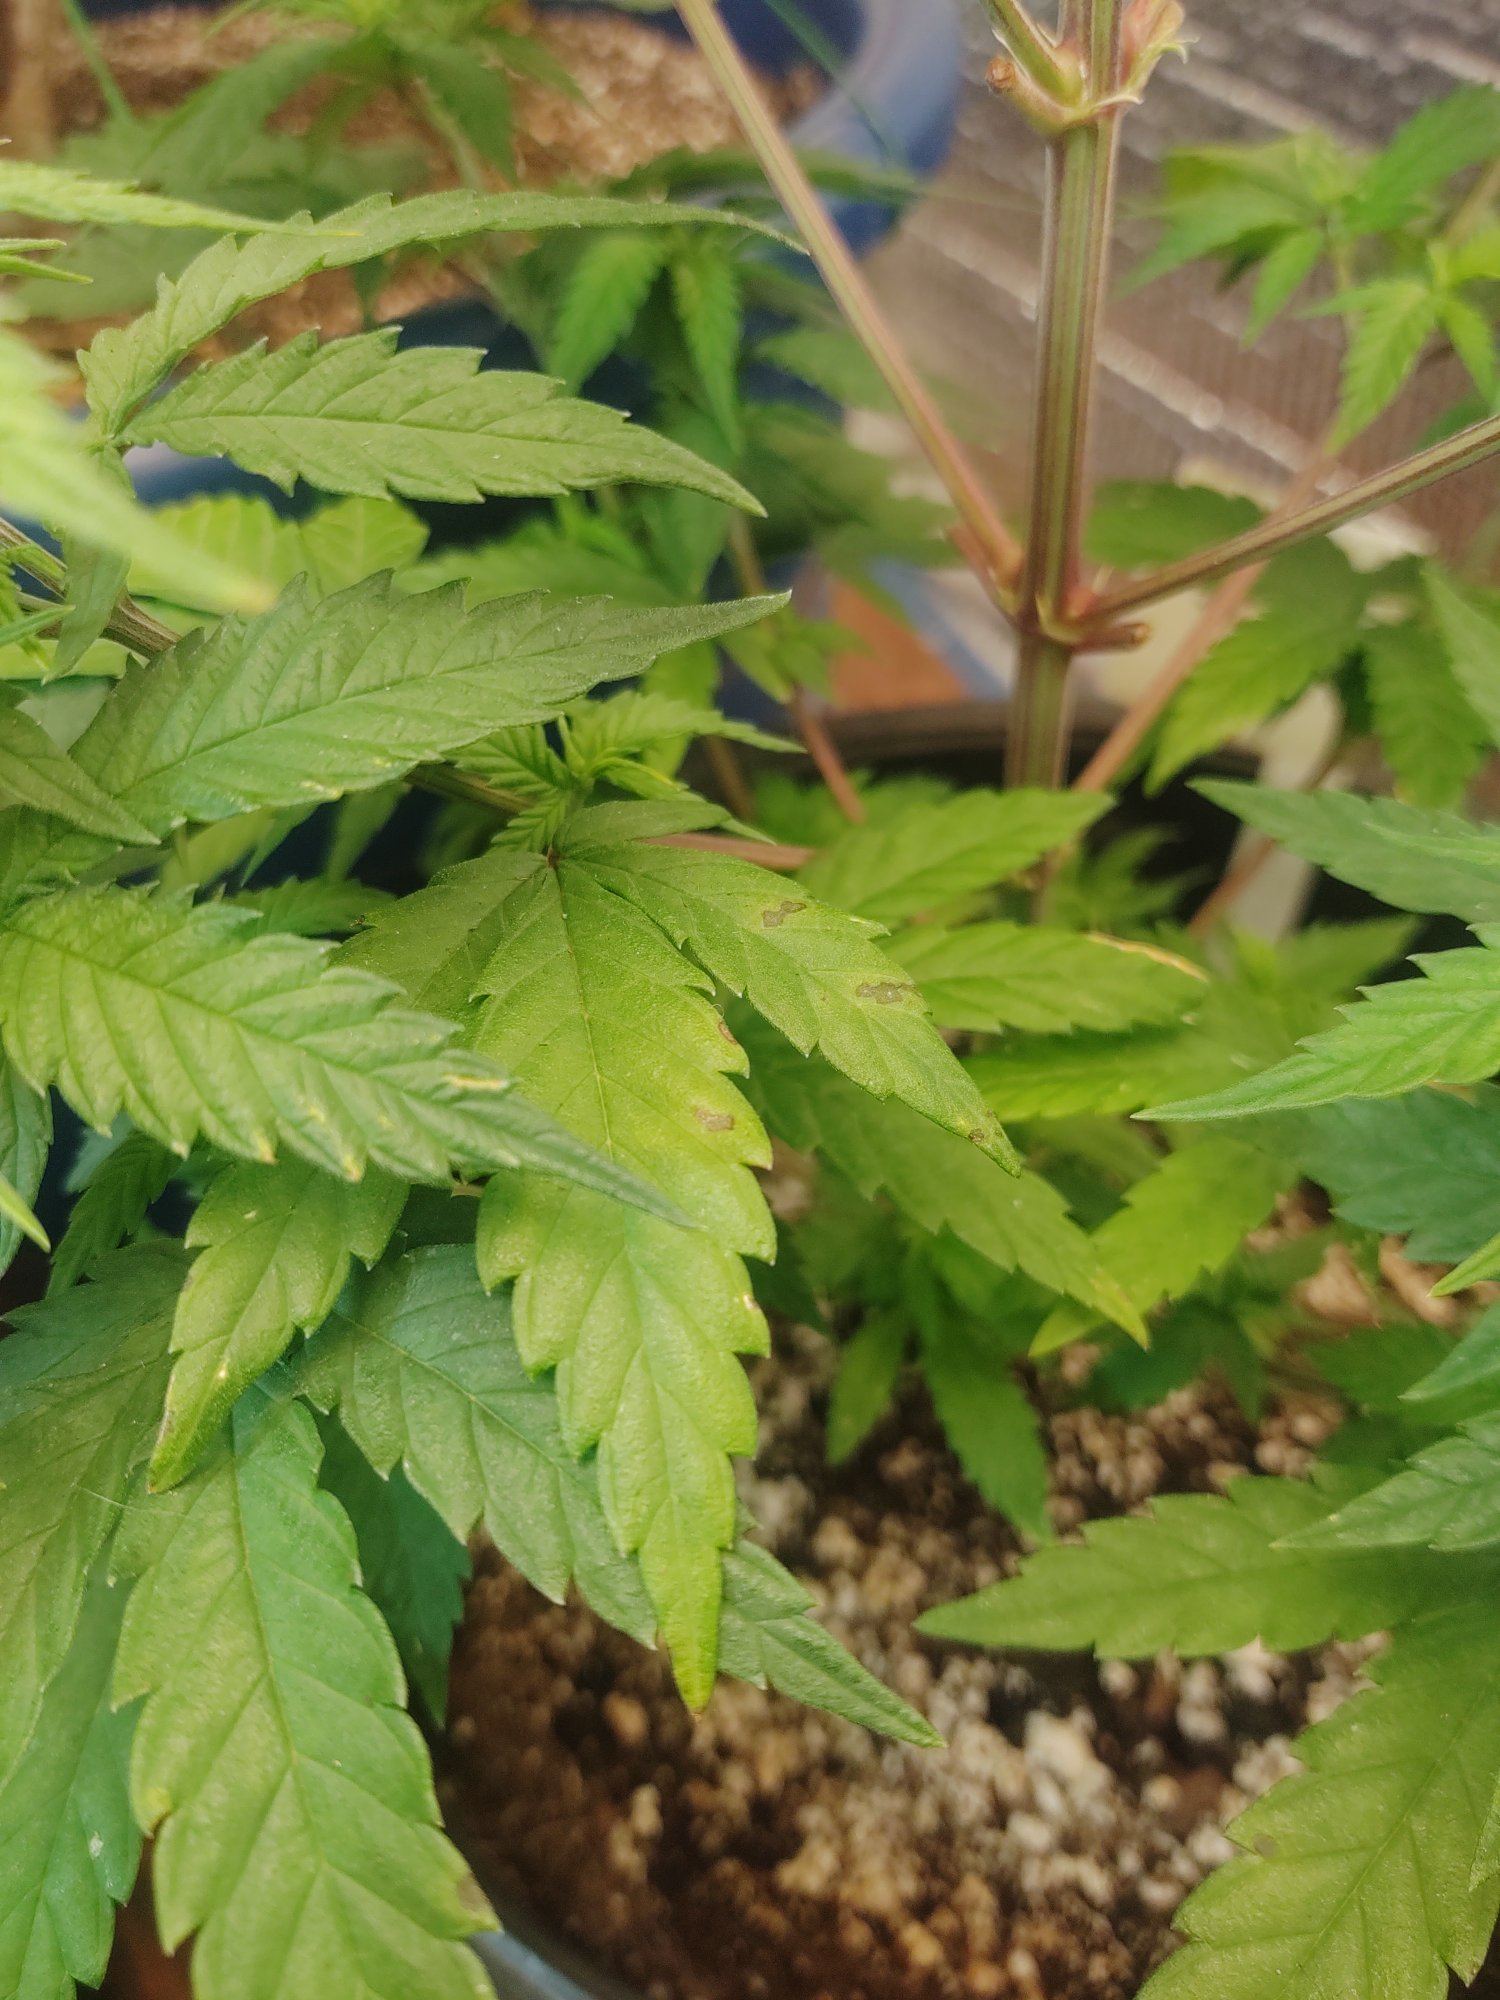 Issues with slowed growth and spots